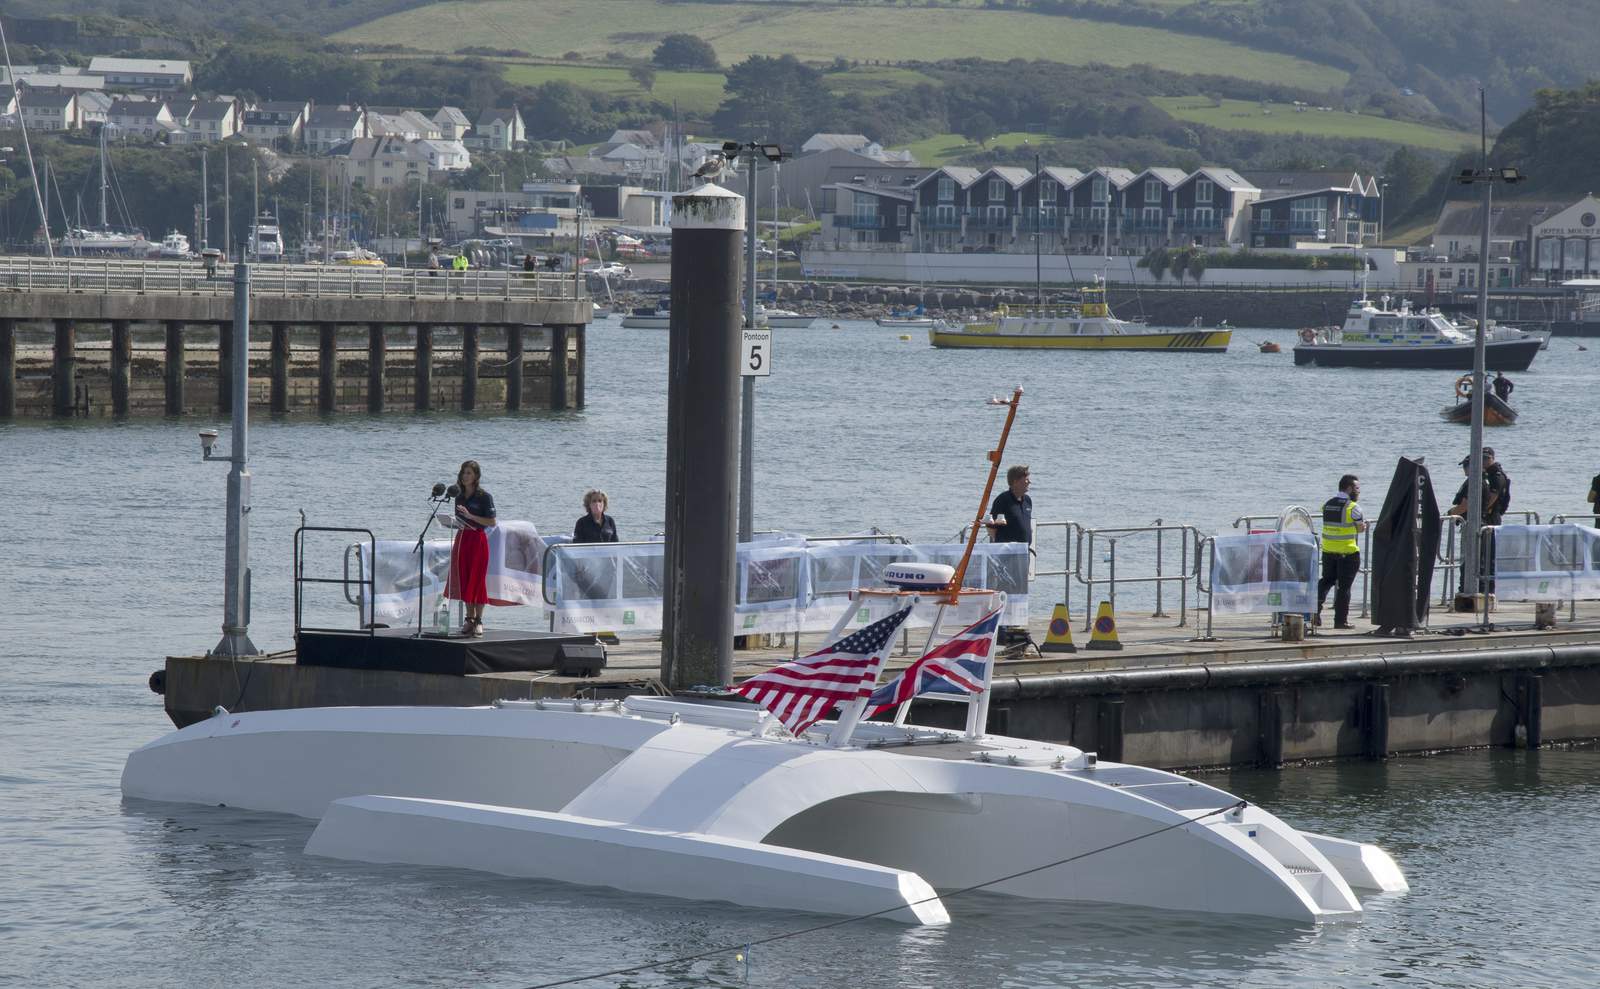 High-tech UK-US ship launched on 400th Mayflower anniversary